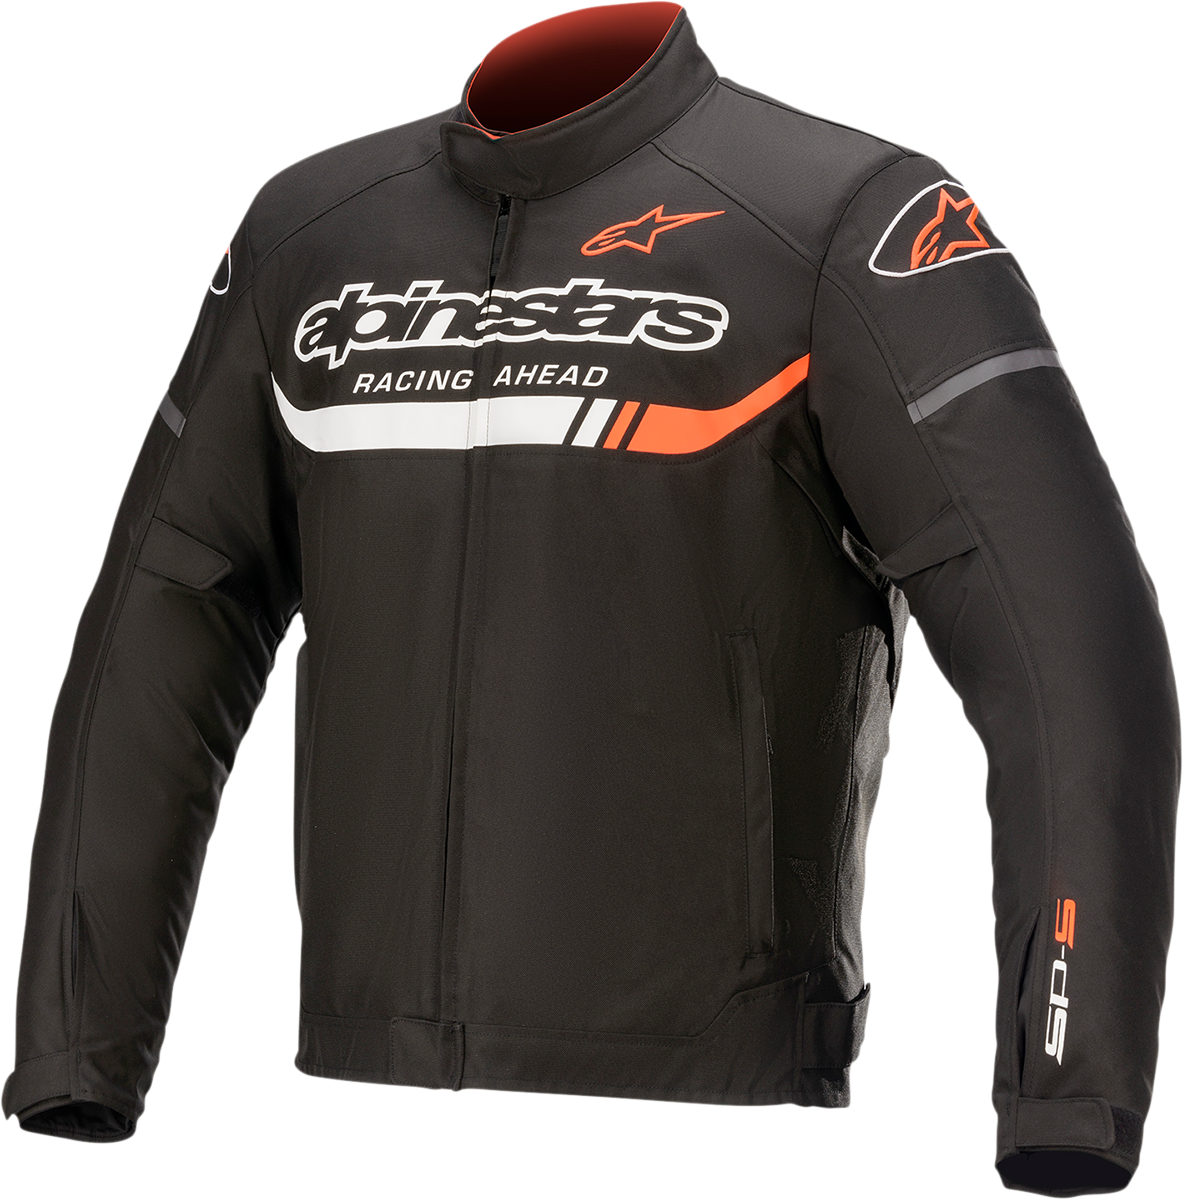 ALPINESTARS T-SPS Ignition Jacket - Black/White/Red - Small 3200322-1231-S